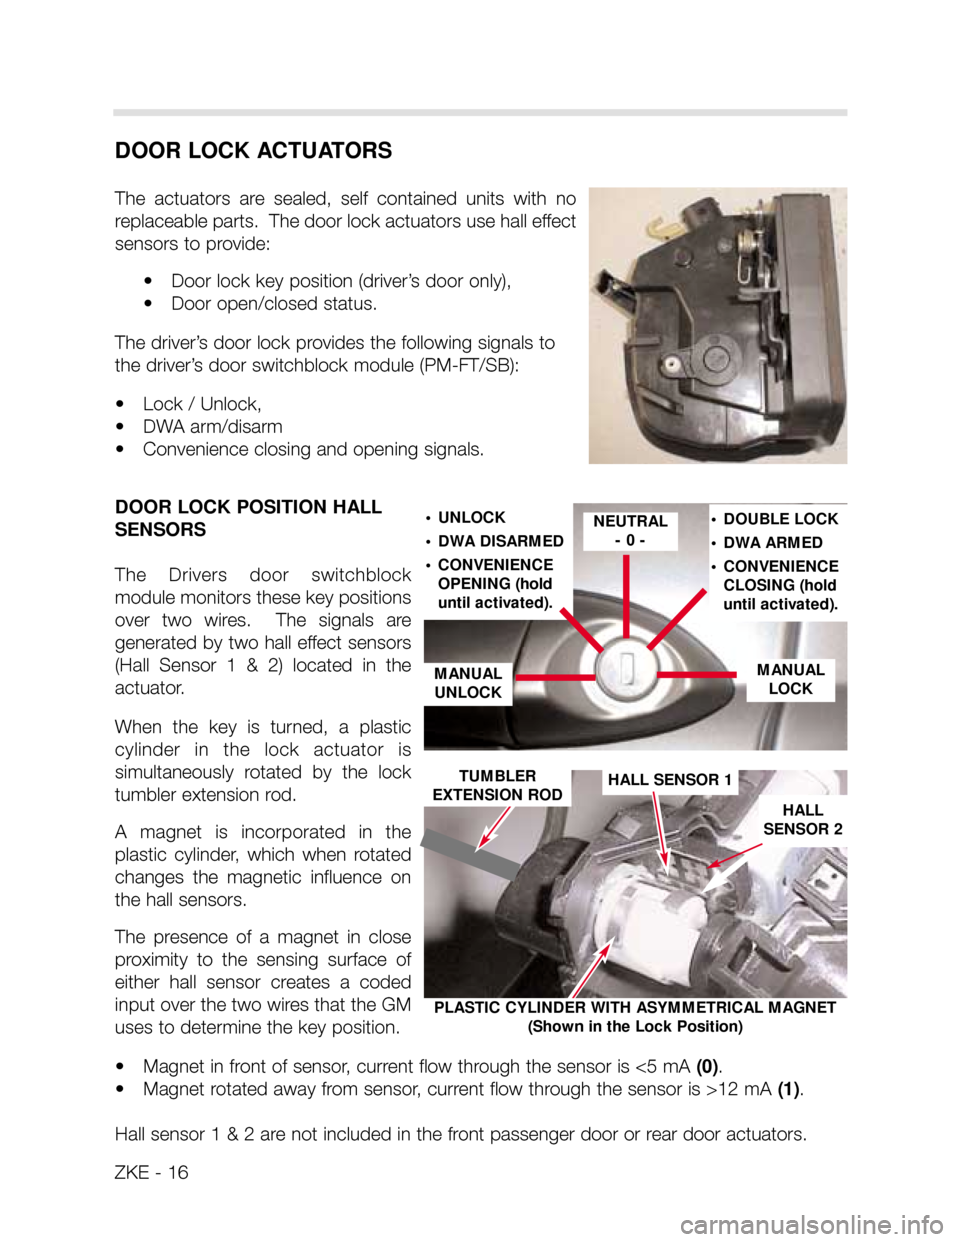 BMW X5 2003 E53 Central Body Electronics Workshop Manual DOOR LOCK ACTUATORS
The  actuators  are  sealed,  self  contained  units  with  no
replaceable parts.  The door lock actuators use hall effect
sensors to provide:
• Door lock key position (driver’